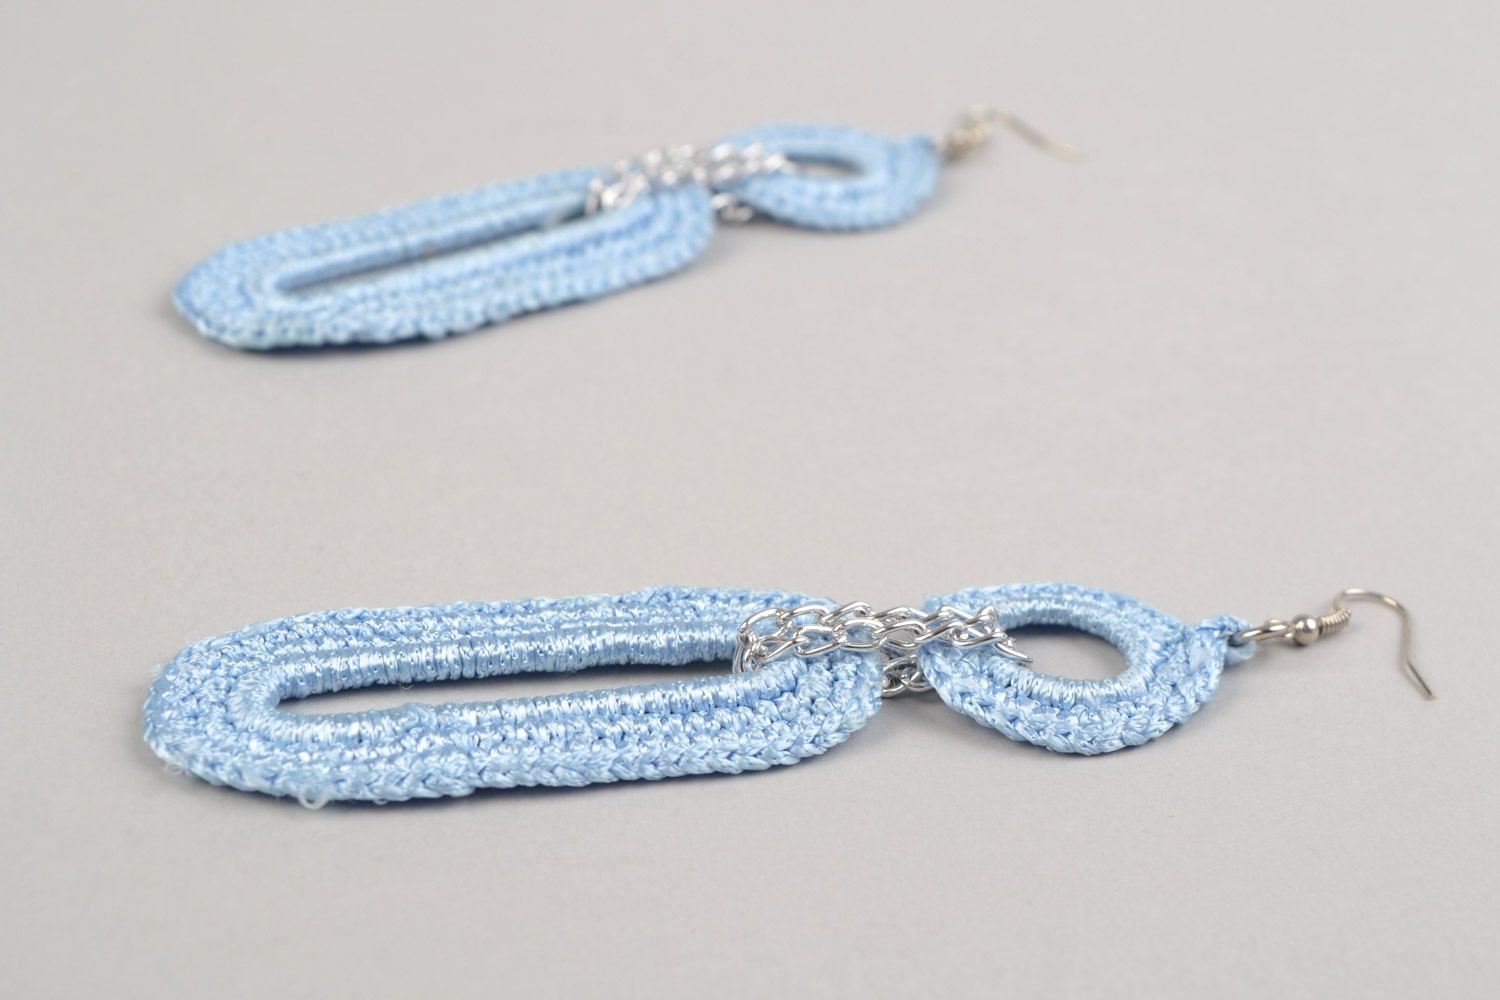 Handmade earrings with metal basis woven over with blue viscose threads photo 5